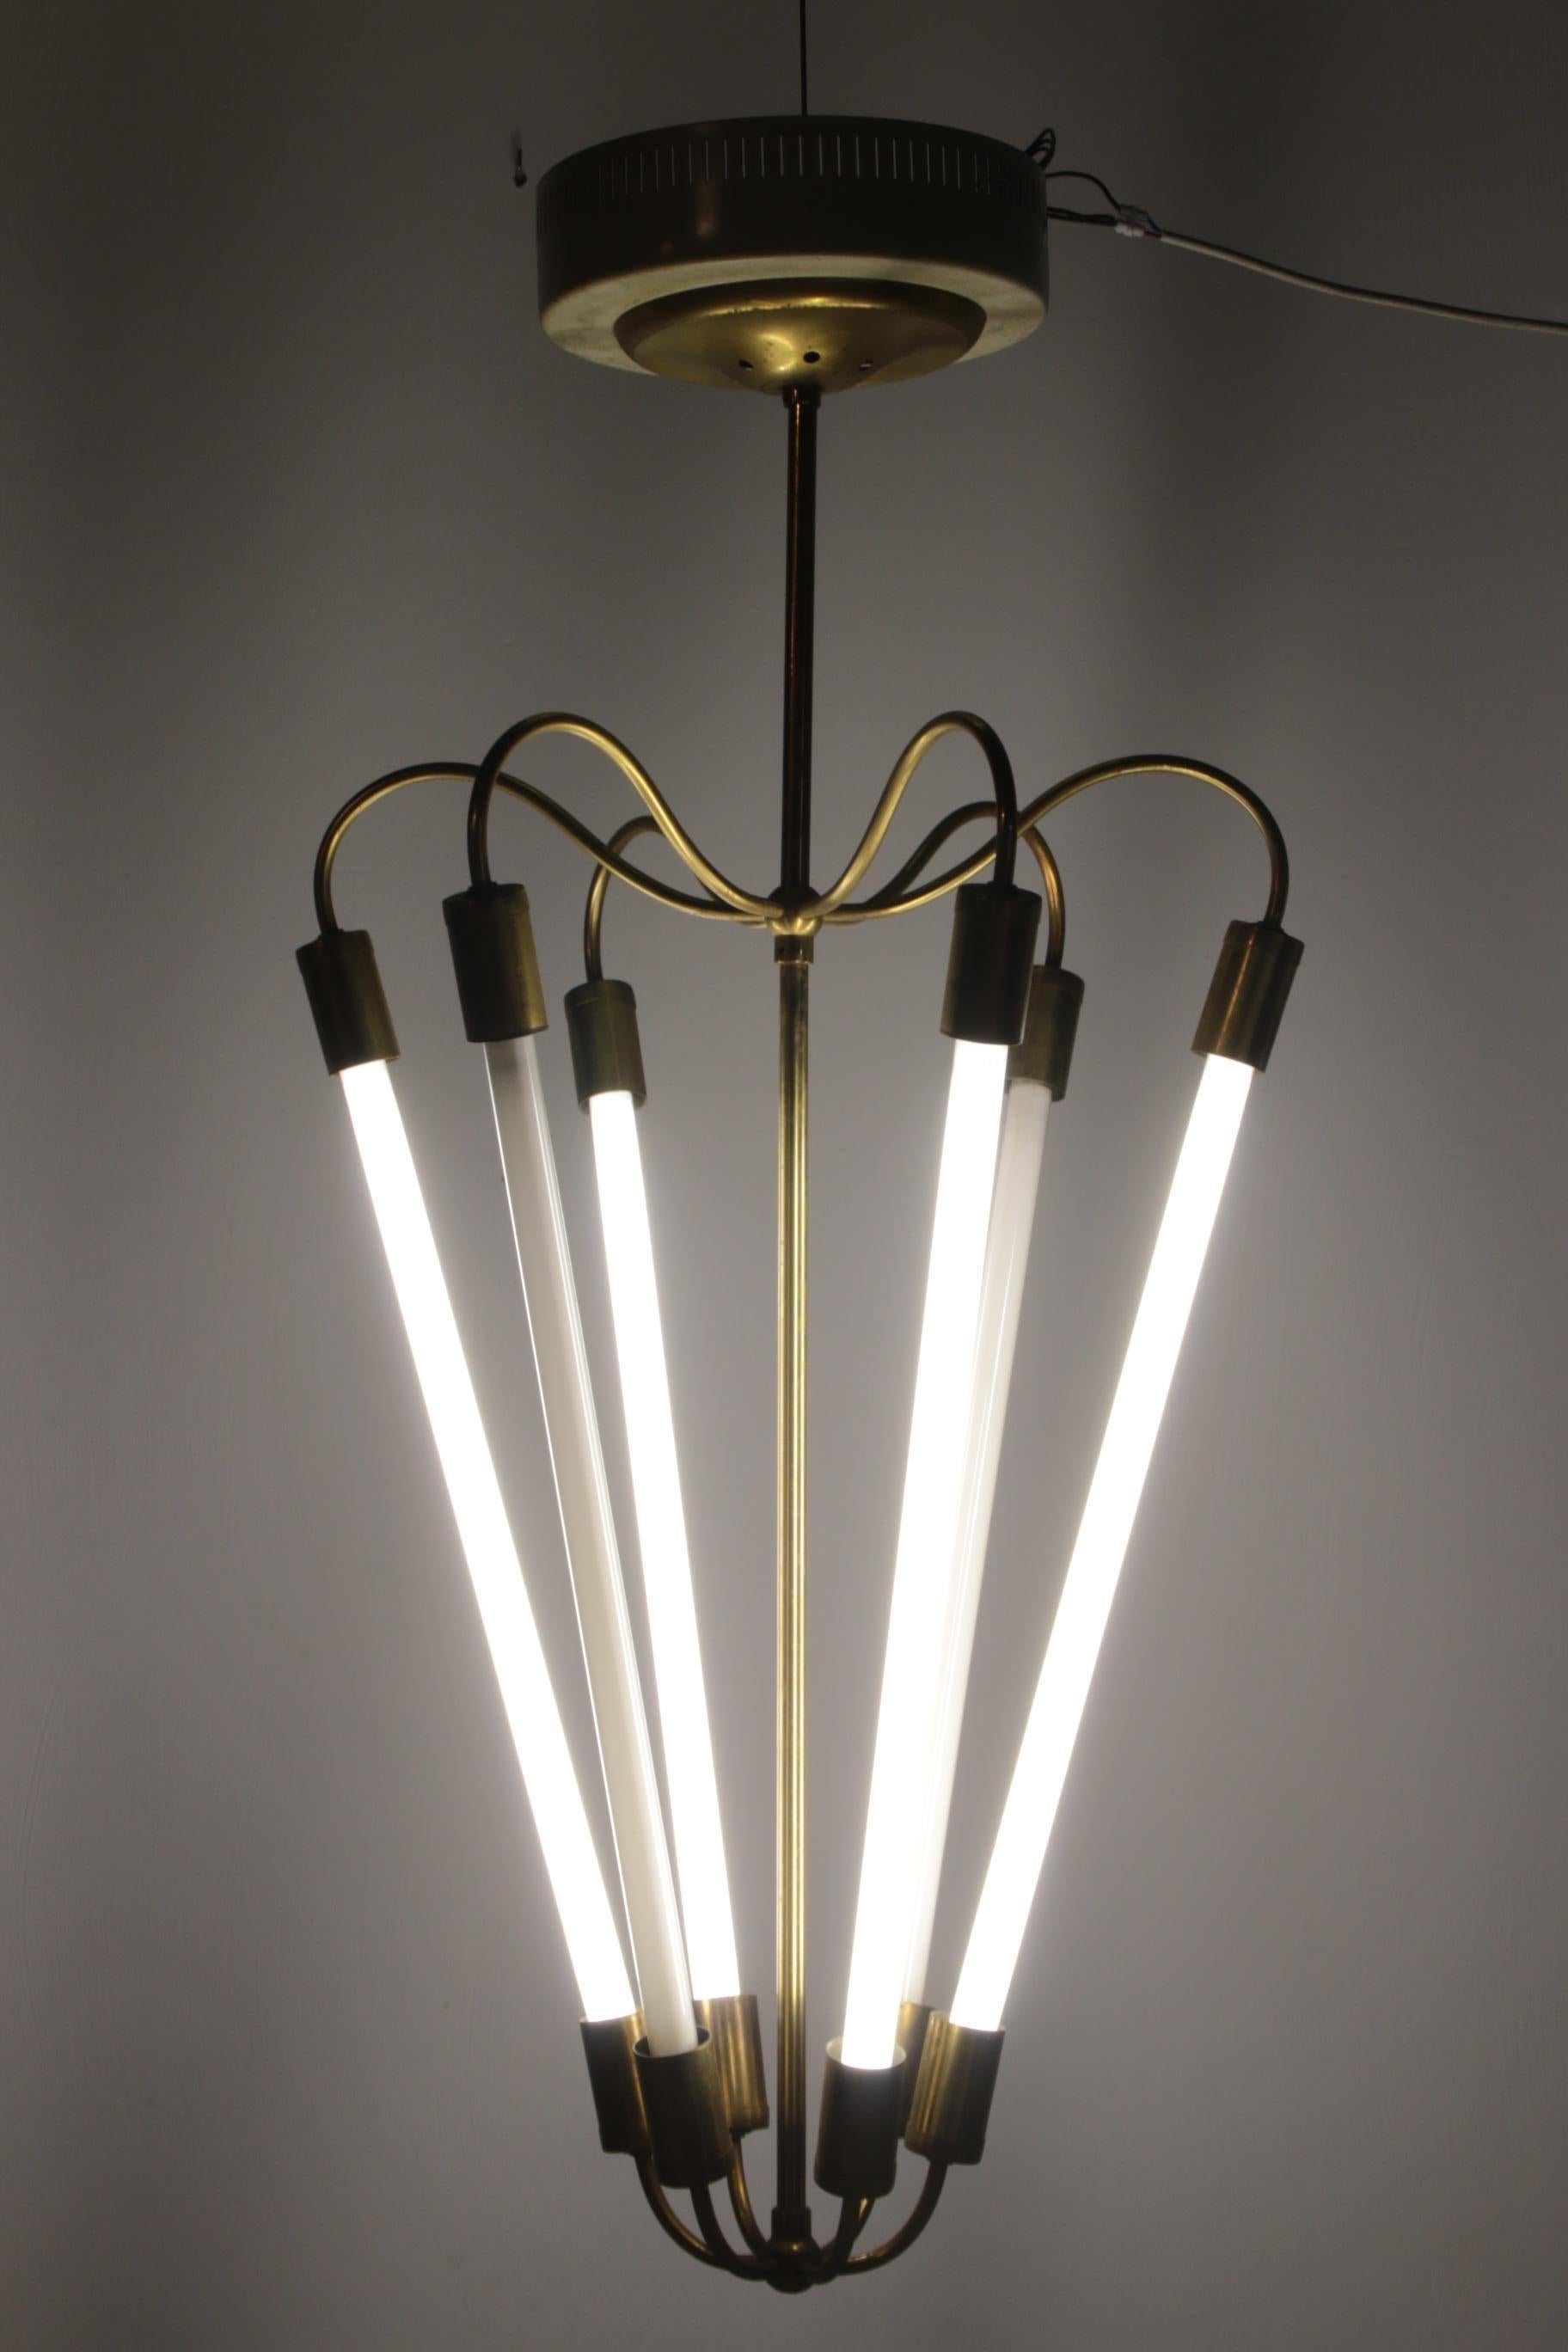 This Art Deco inspired Bauhaus chandelier has a gold coloured brass frame in which there is space for 6 fluorescent lights. 
The design is by the German creator Christian Dell for the brand Kaiser & Co. The ceiling mount is also made of metal and